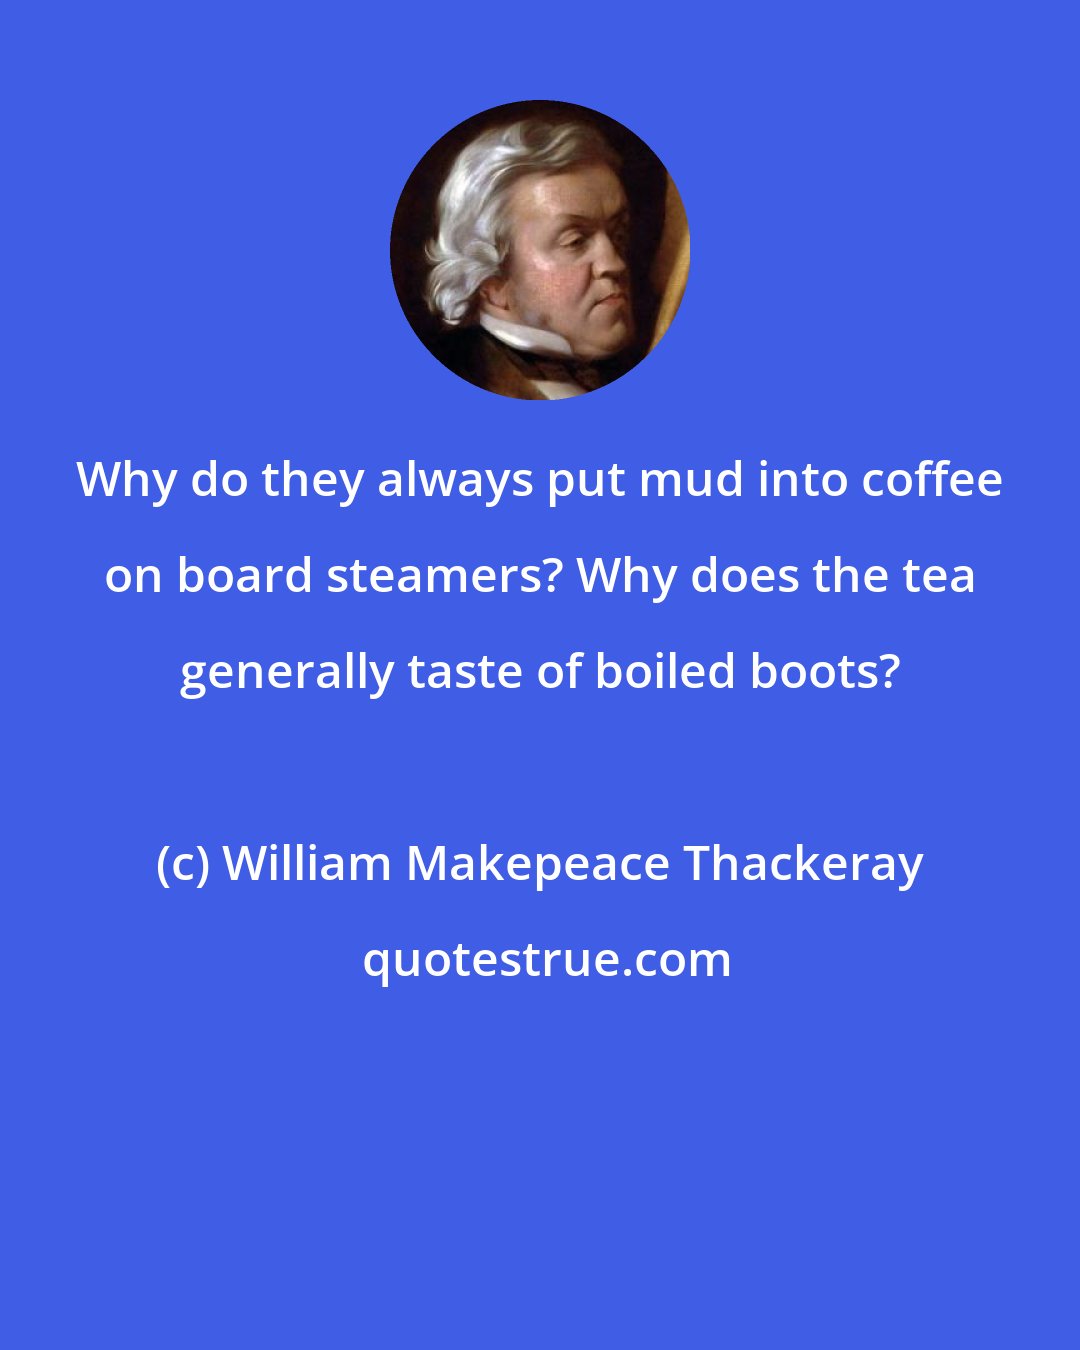 William Makepeace Thackeray: Why do they always put mud into coffee on board steamers? Why does the tea generally taste of boiled boots?